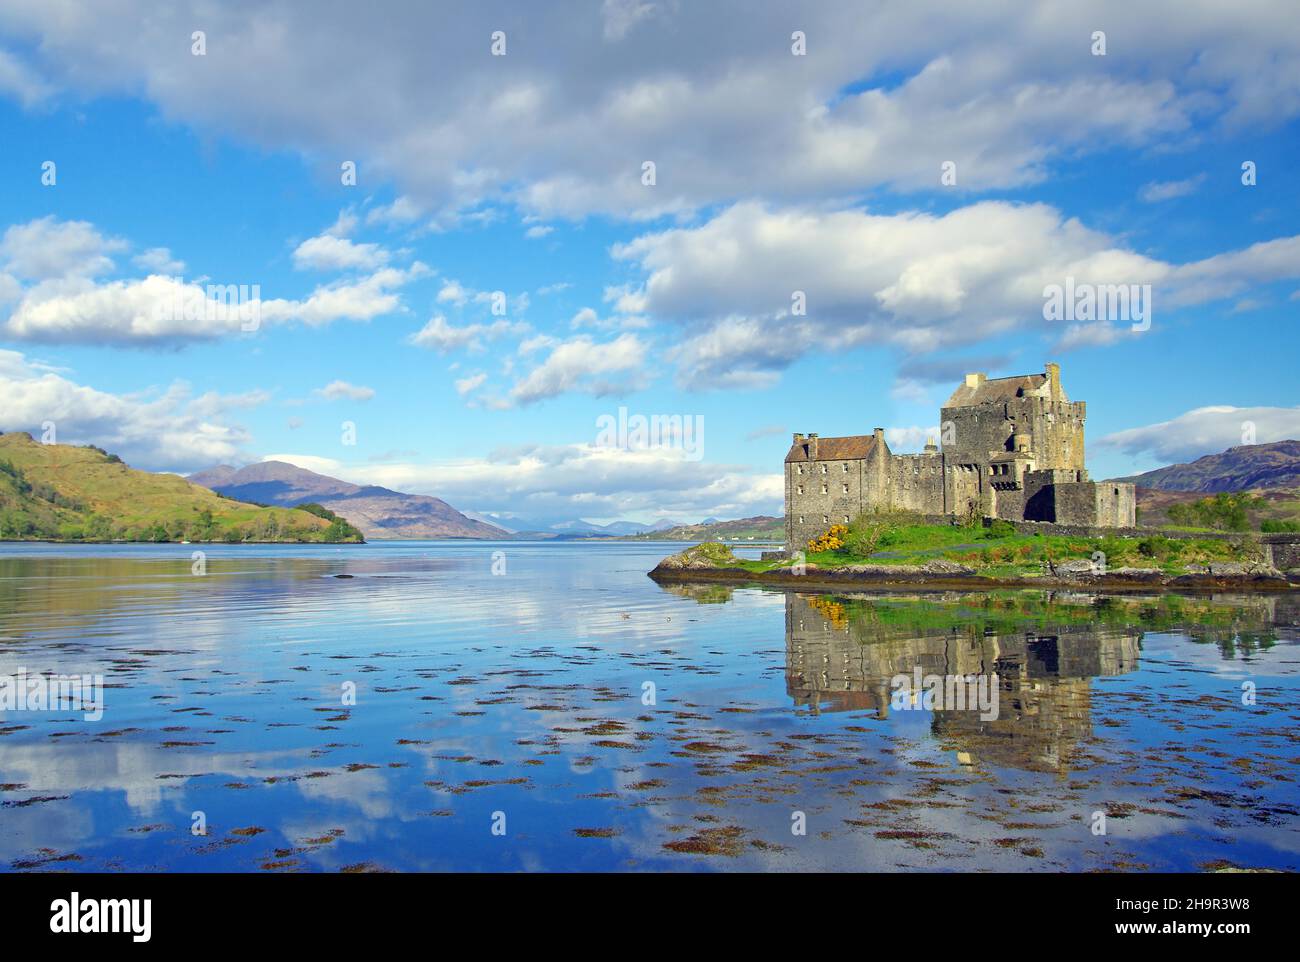 Eilean Donan Castle reflected in water, moated castle, Highlands, Dornie, film locations, Scotland, Great Britain Stock Photo